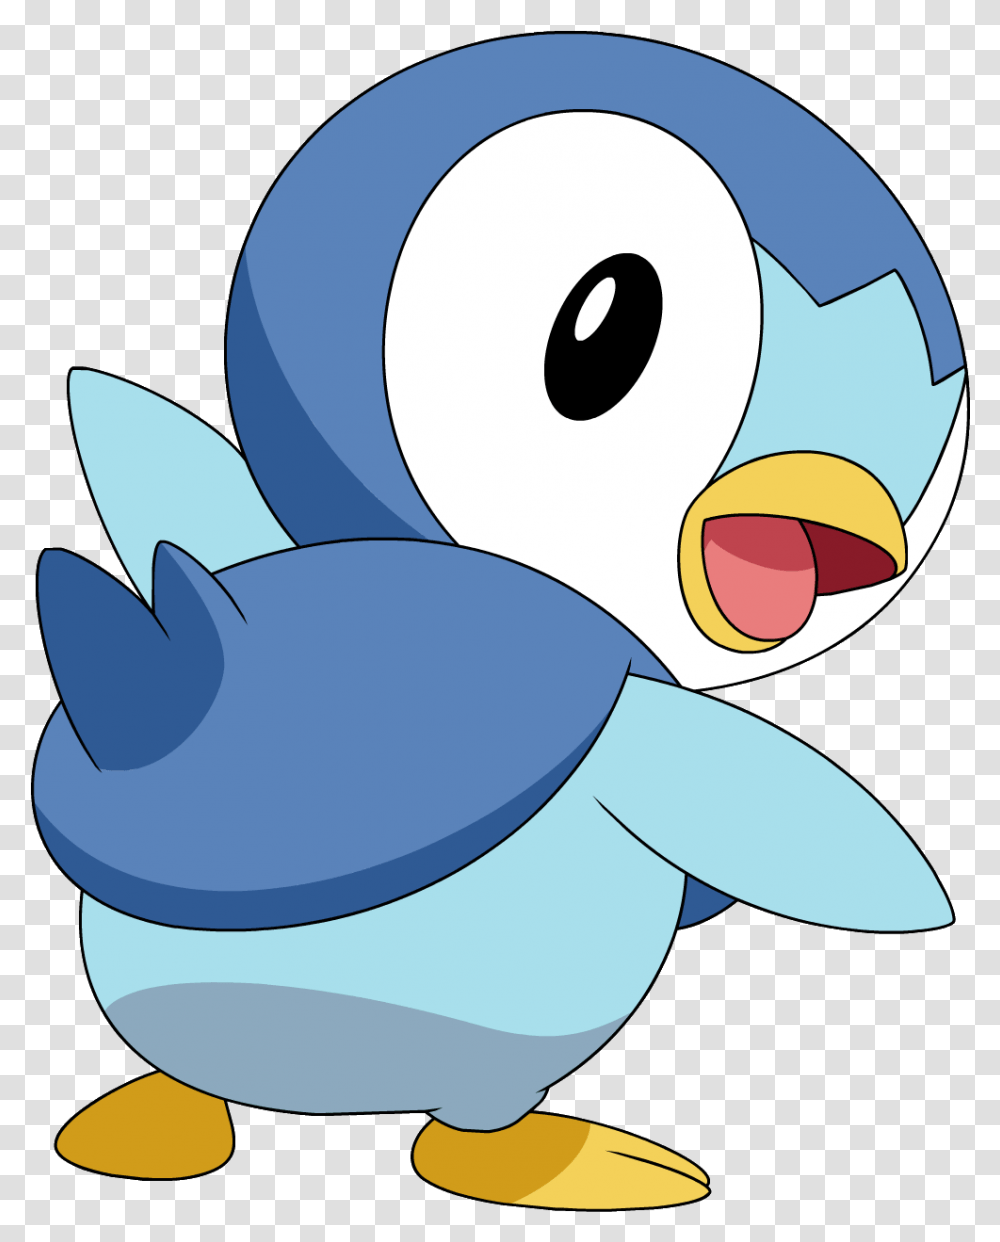 Download Hd 393piplup Dp Anime 3 Pokemon Piplup, Animal, Angry Birds, Shark, Sea Life Transparent Png